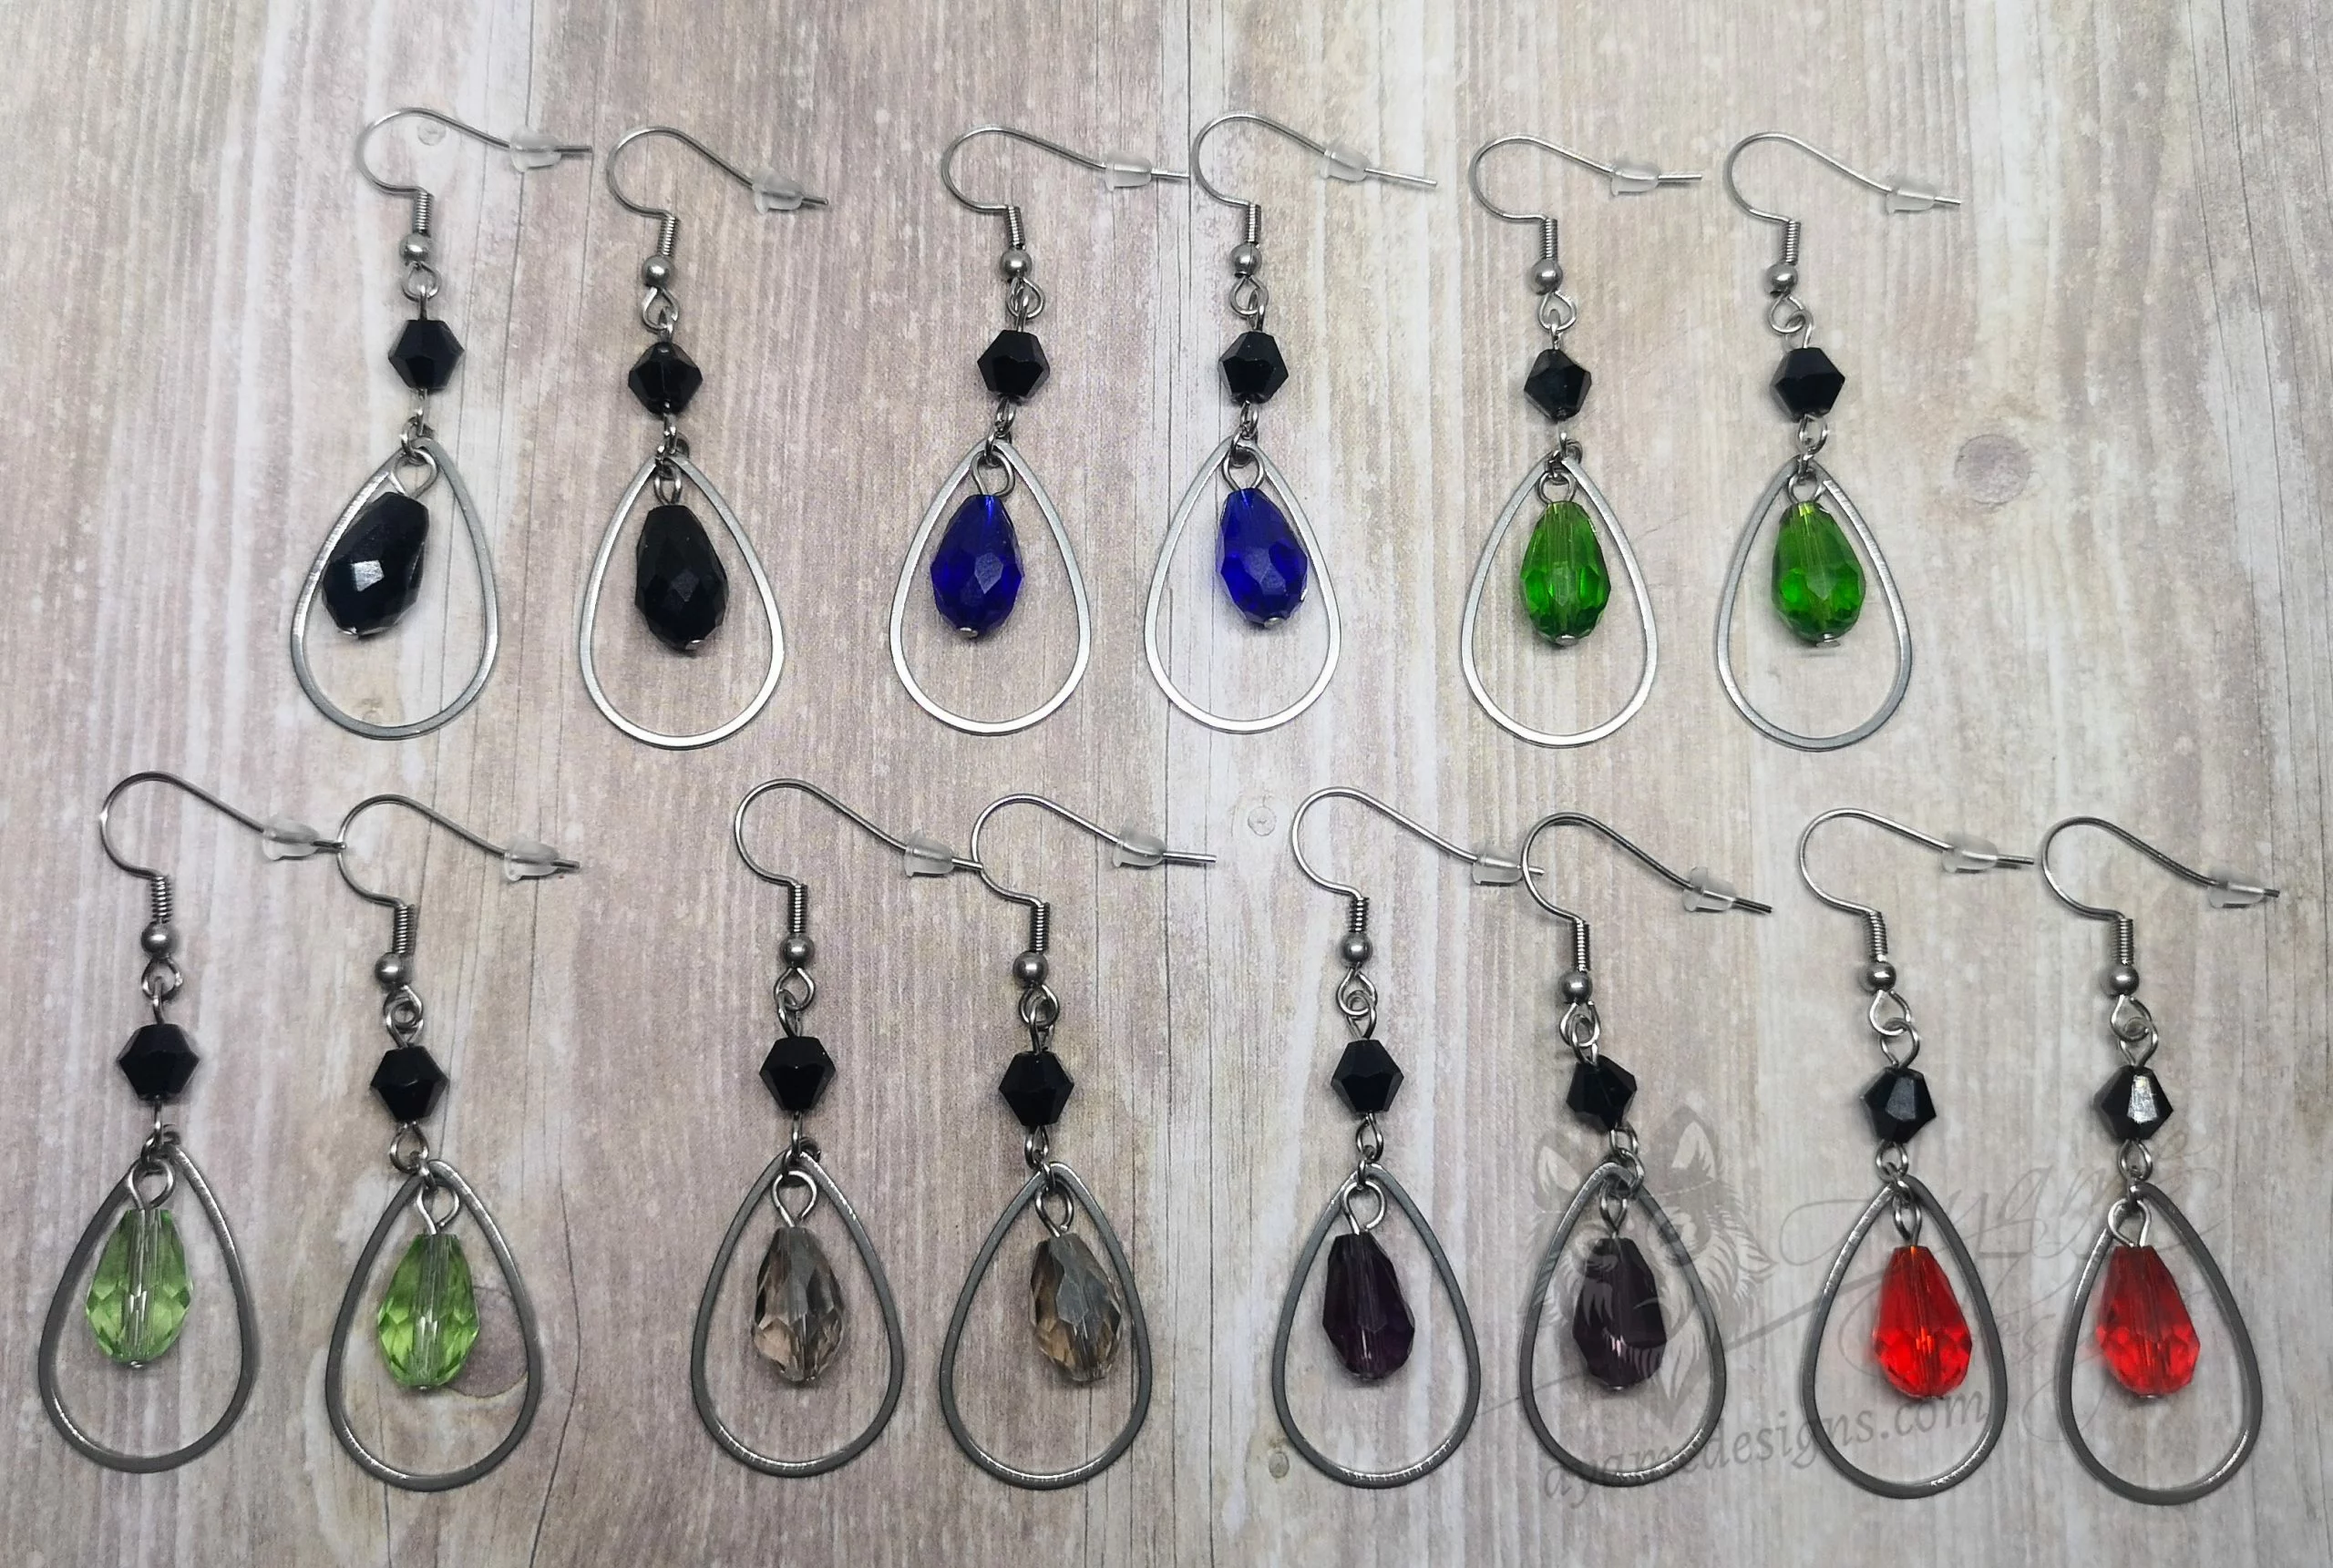 Handmade earrings with stainless steel teardrop charms, with Austrian crystal beads, on stainless steel earring hooks